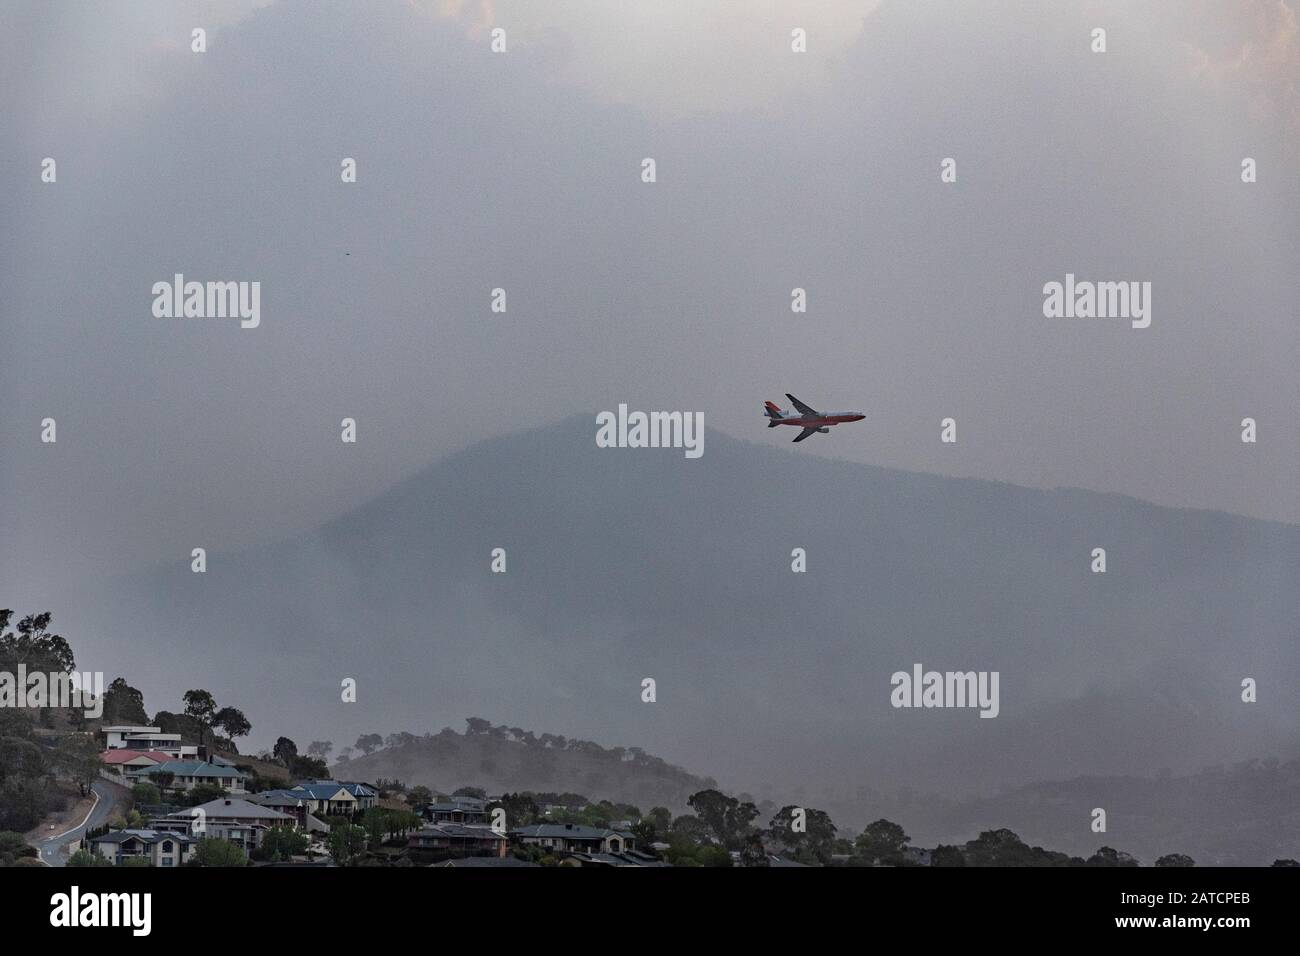 Orroral Valley Bushfire, Canberra, Australia 01 Feb. 2020. A McDonnell Douglas DC-10 Air Tanker preparing to drop fire retardant to protect the Canberra suburb of Banks. The fire is threatening the suburb and the retardant drop is to try to halt its advance. Credit: FoxTree gfx/Alamy Live News Stock Photo